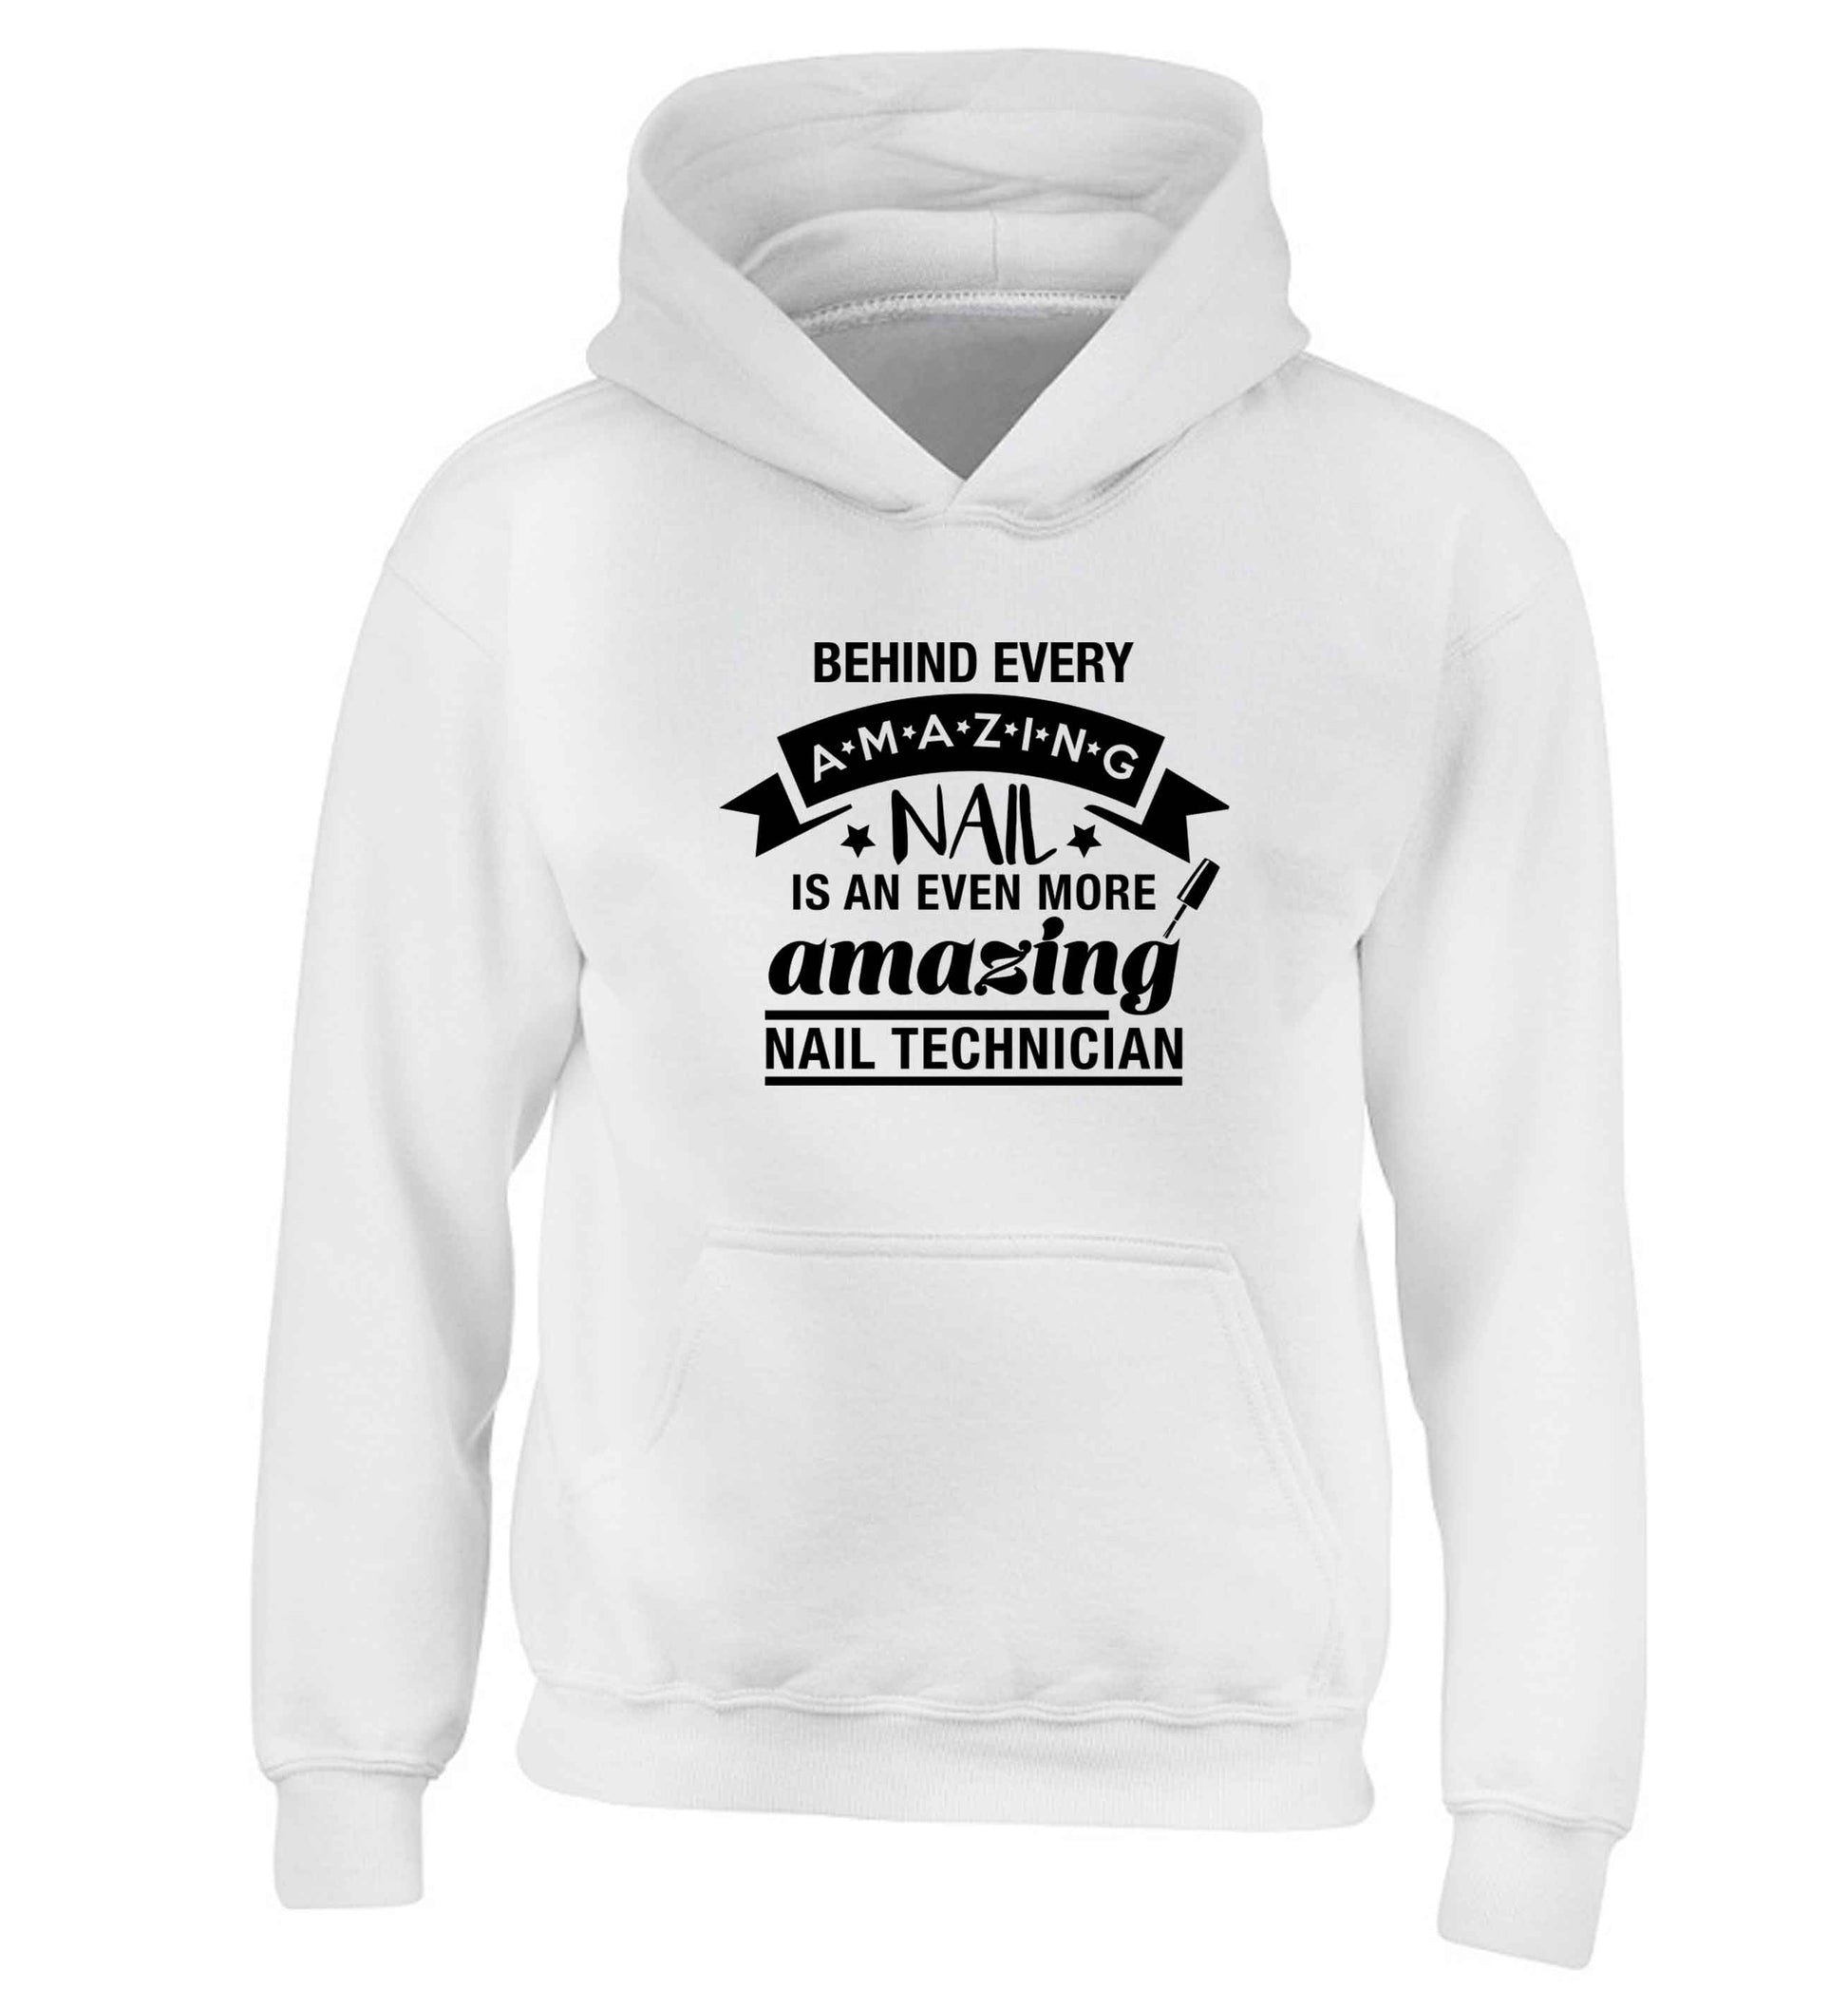 Behind every amazing nail is an even more amazing nail technician children's white hoodie 12-13 Years